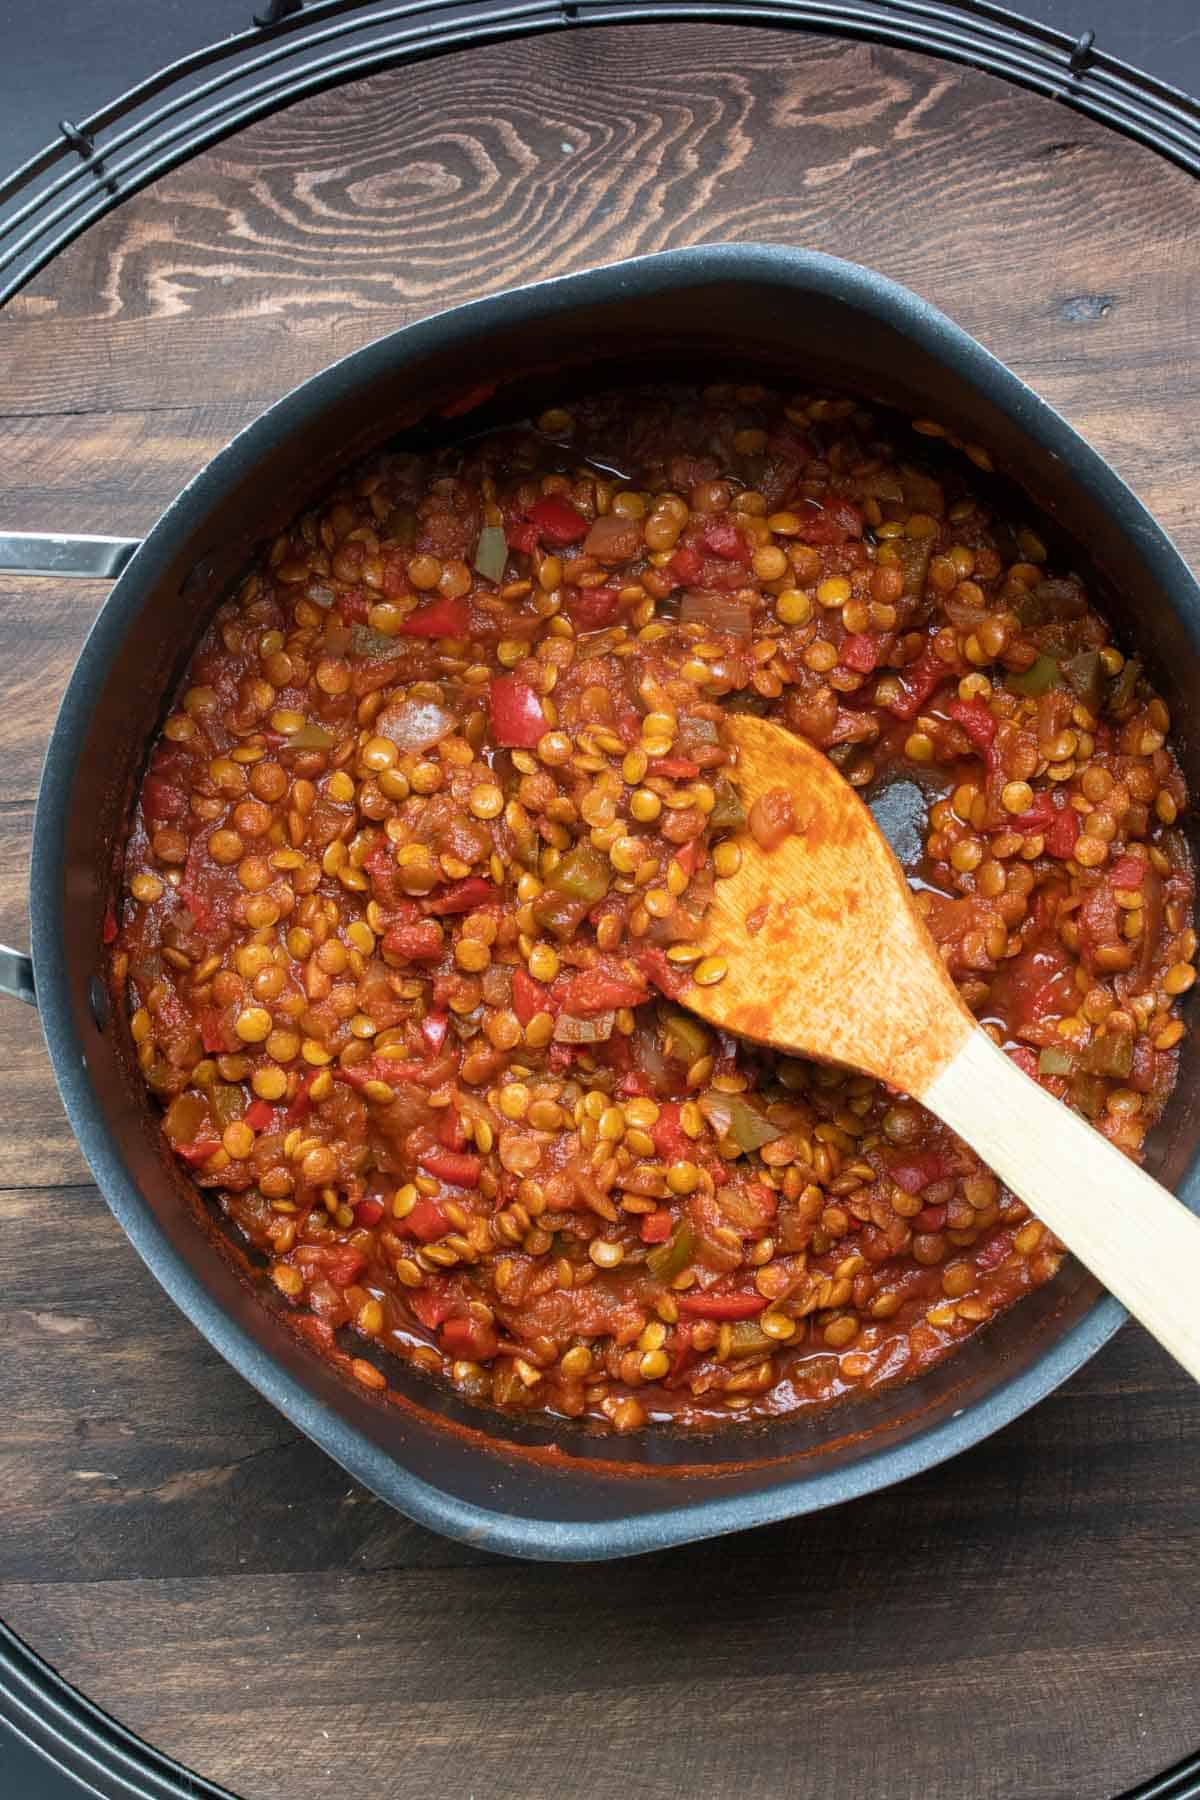 Thickened lentil sloppy joe mixture cooking in a pan